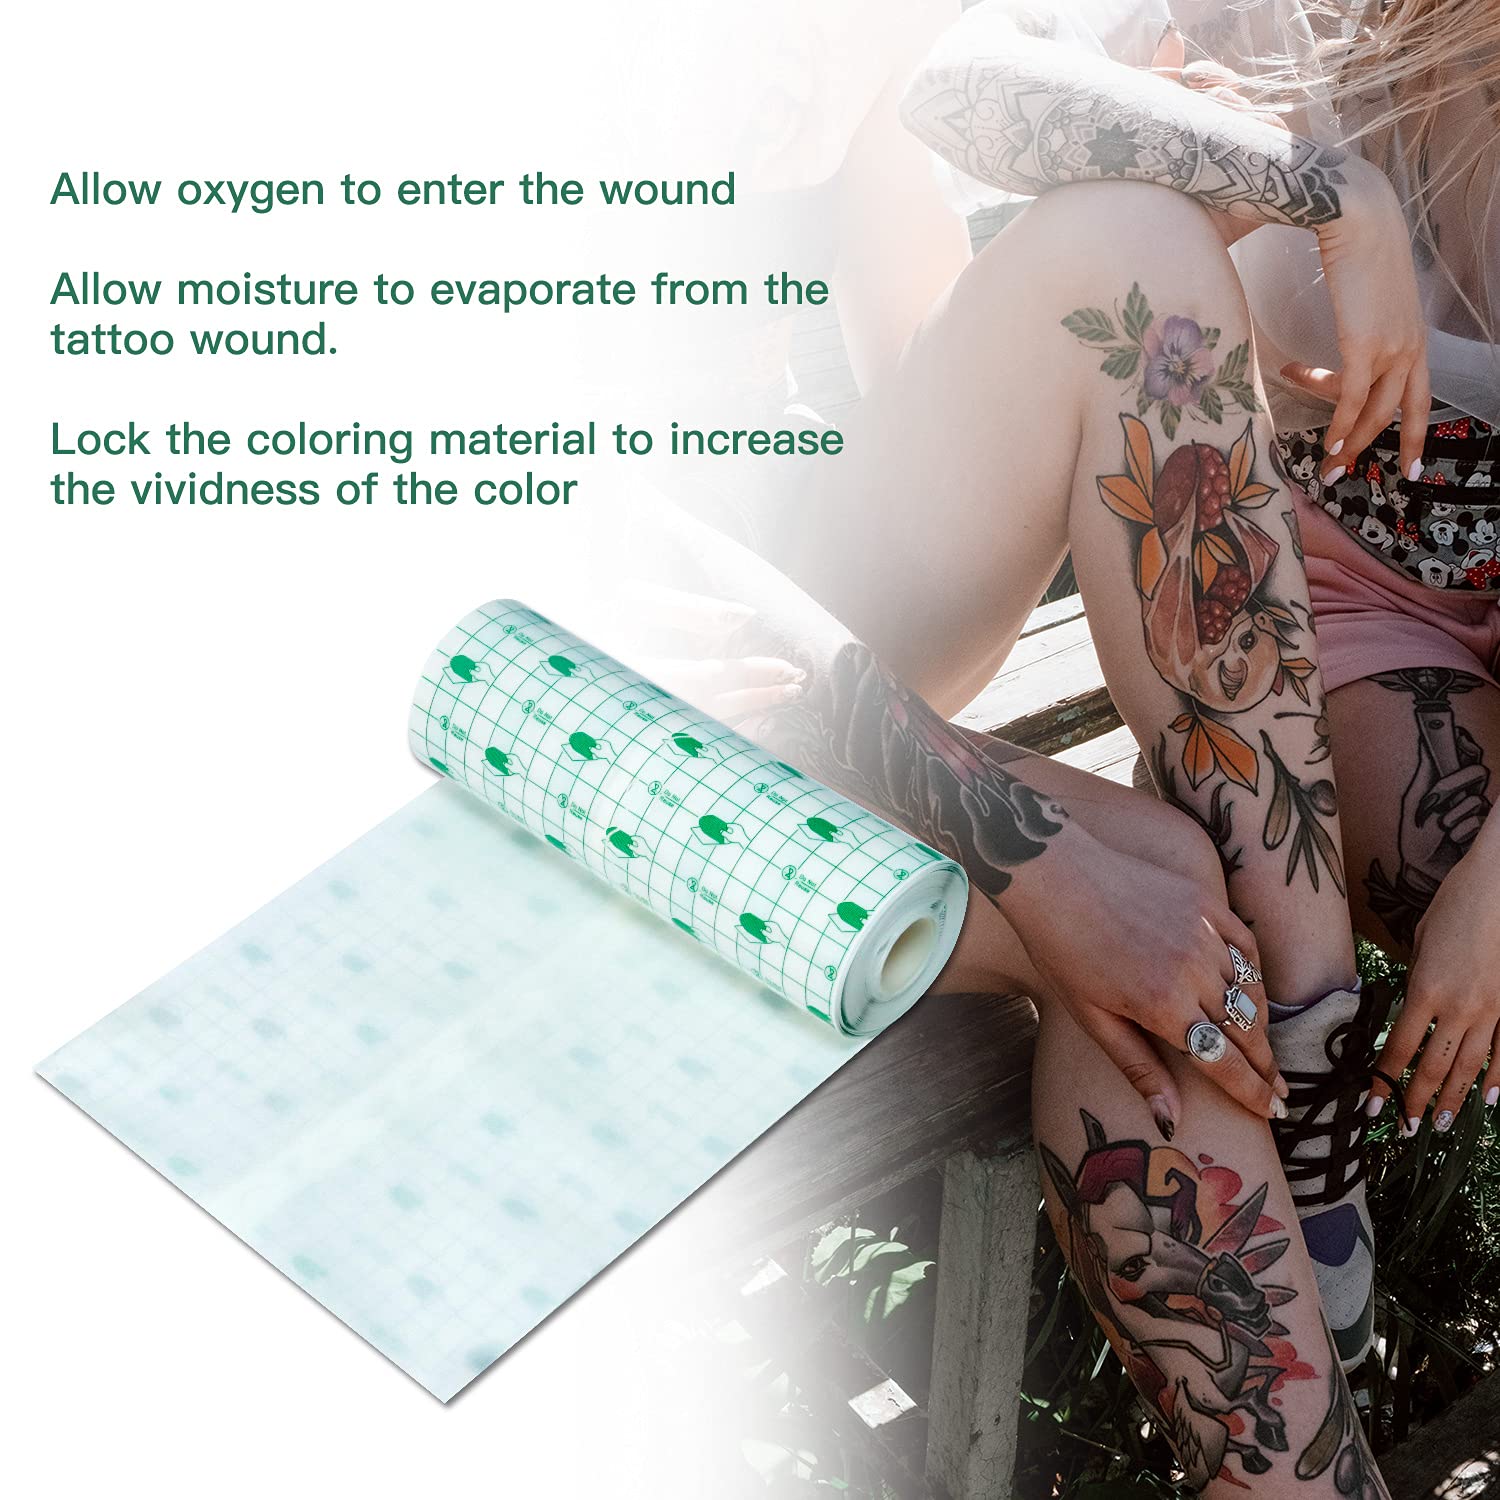 Tattoo Aftercare Waterproof Bandage 15cm X 1mtransparent Film  Dressingsecond Skin Healing Protective Clear Adhesive Bandages For Tattoo  Aftercare Reco  Fruugo AE